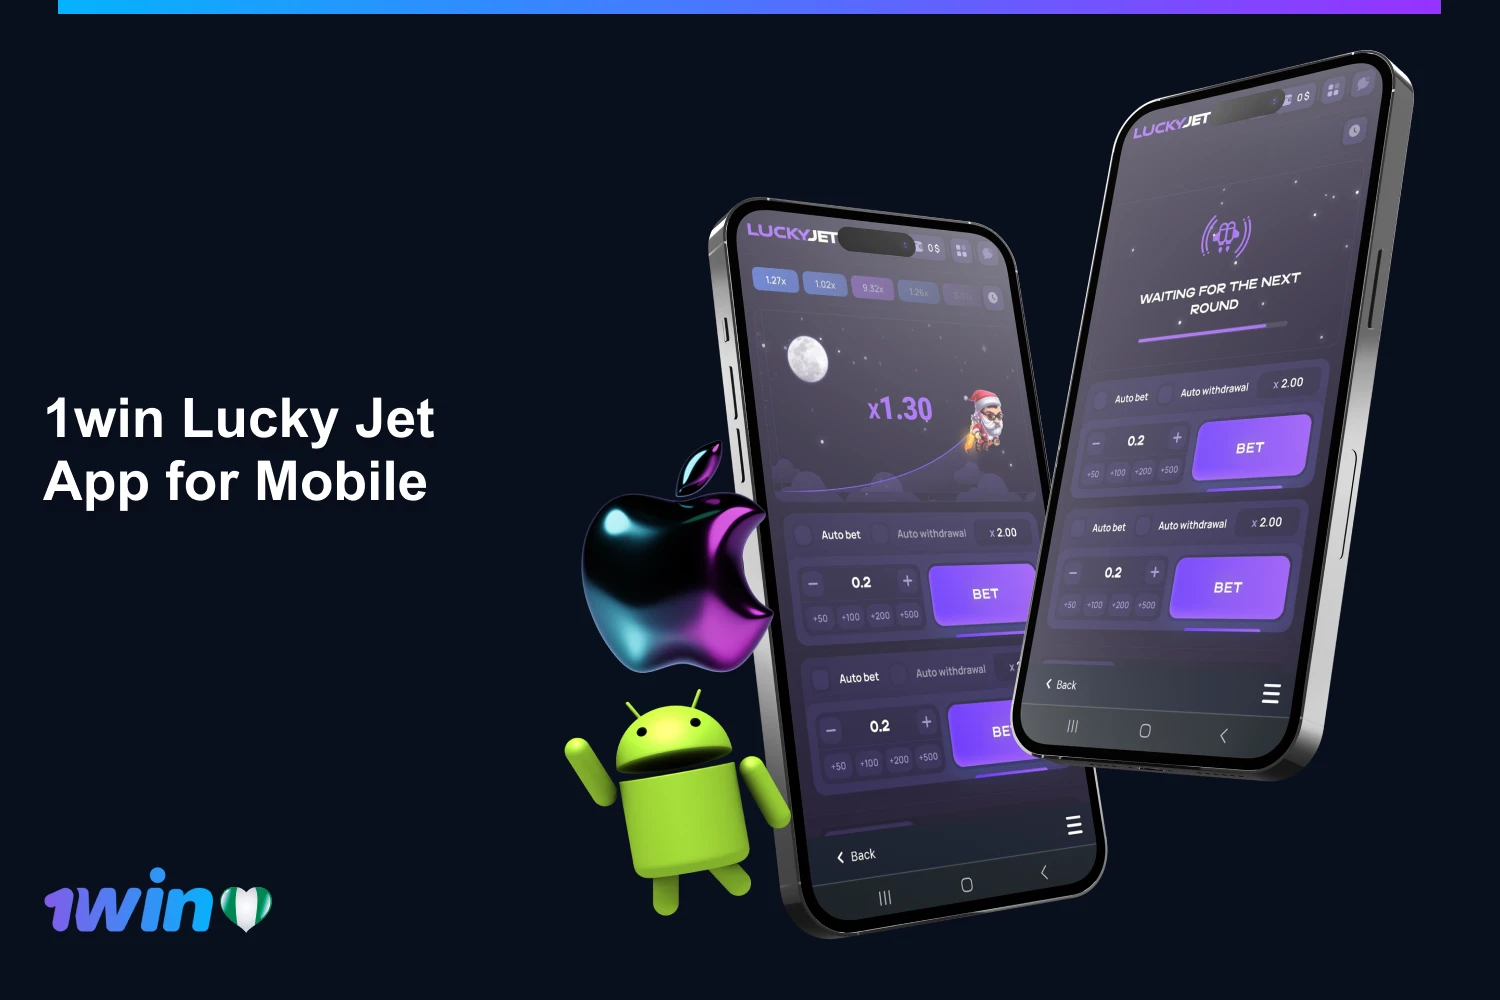 For players from Nigeria who want to play away from home, there is the option to download the 1win Lucky Jet mobile app